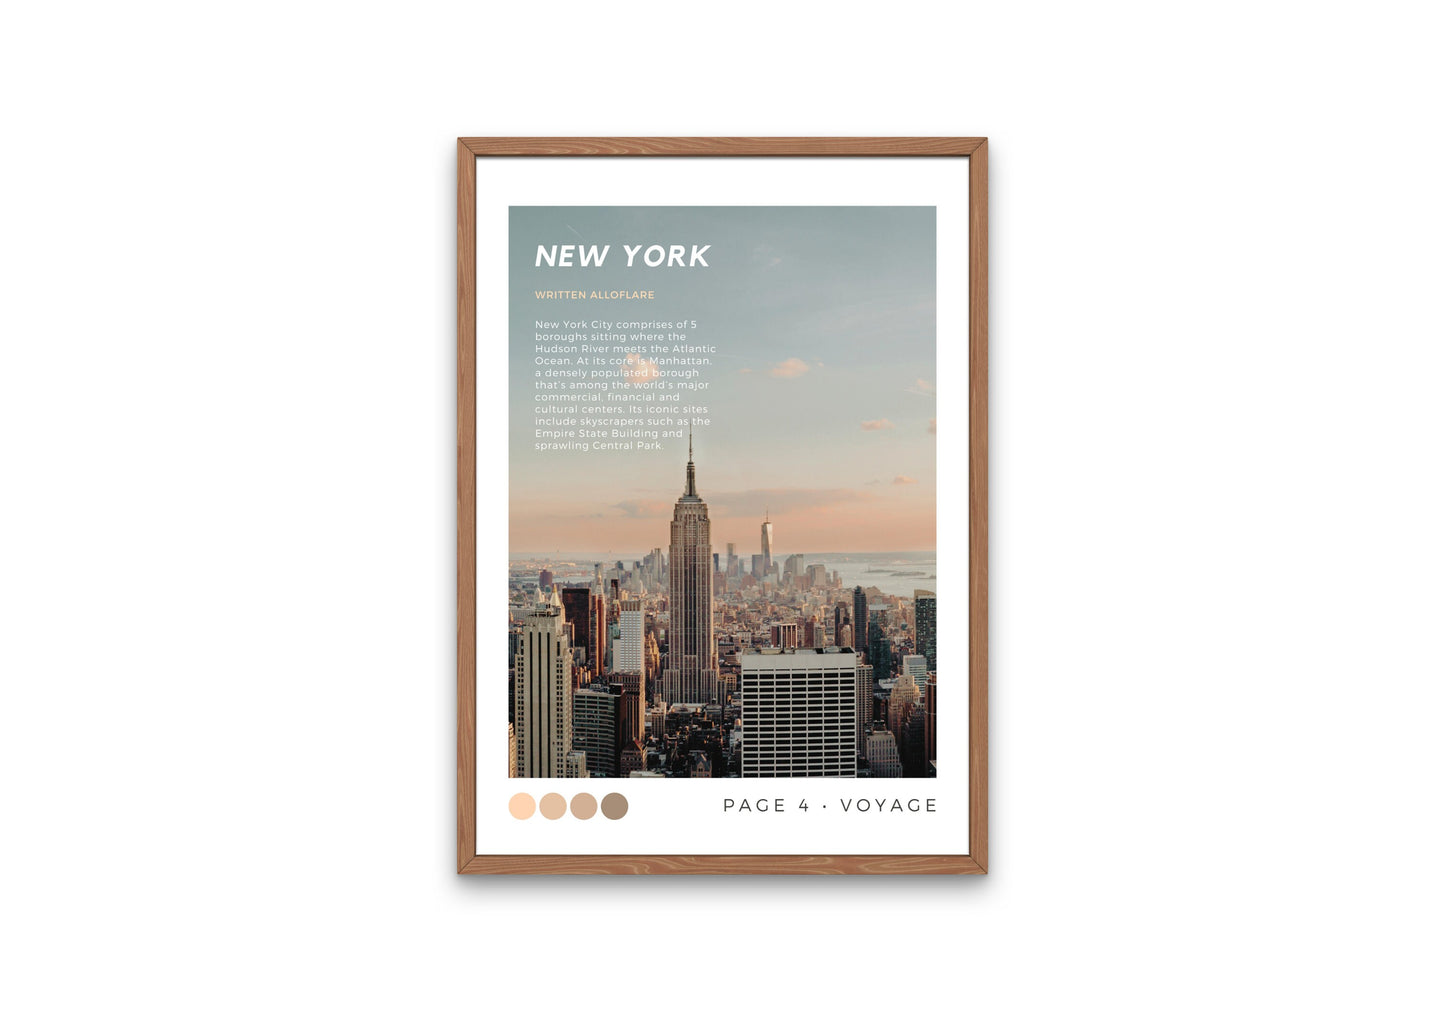 Vintage New York Travel Poster PRINTABLE, Travel Art Print, I heart New York, Famous places, nyc poster, Retro travel poster, vintage travel